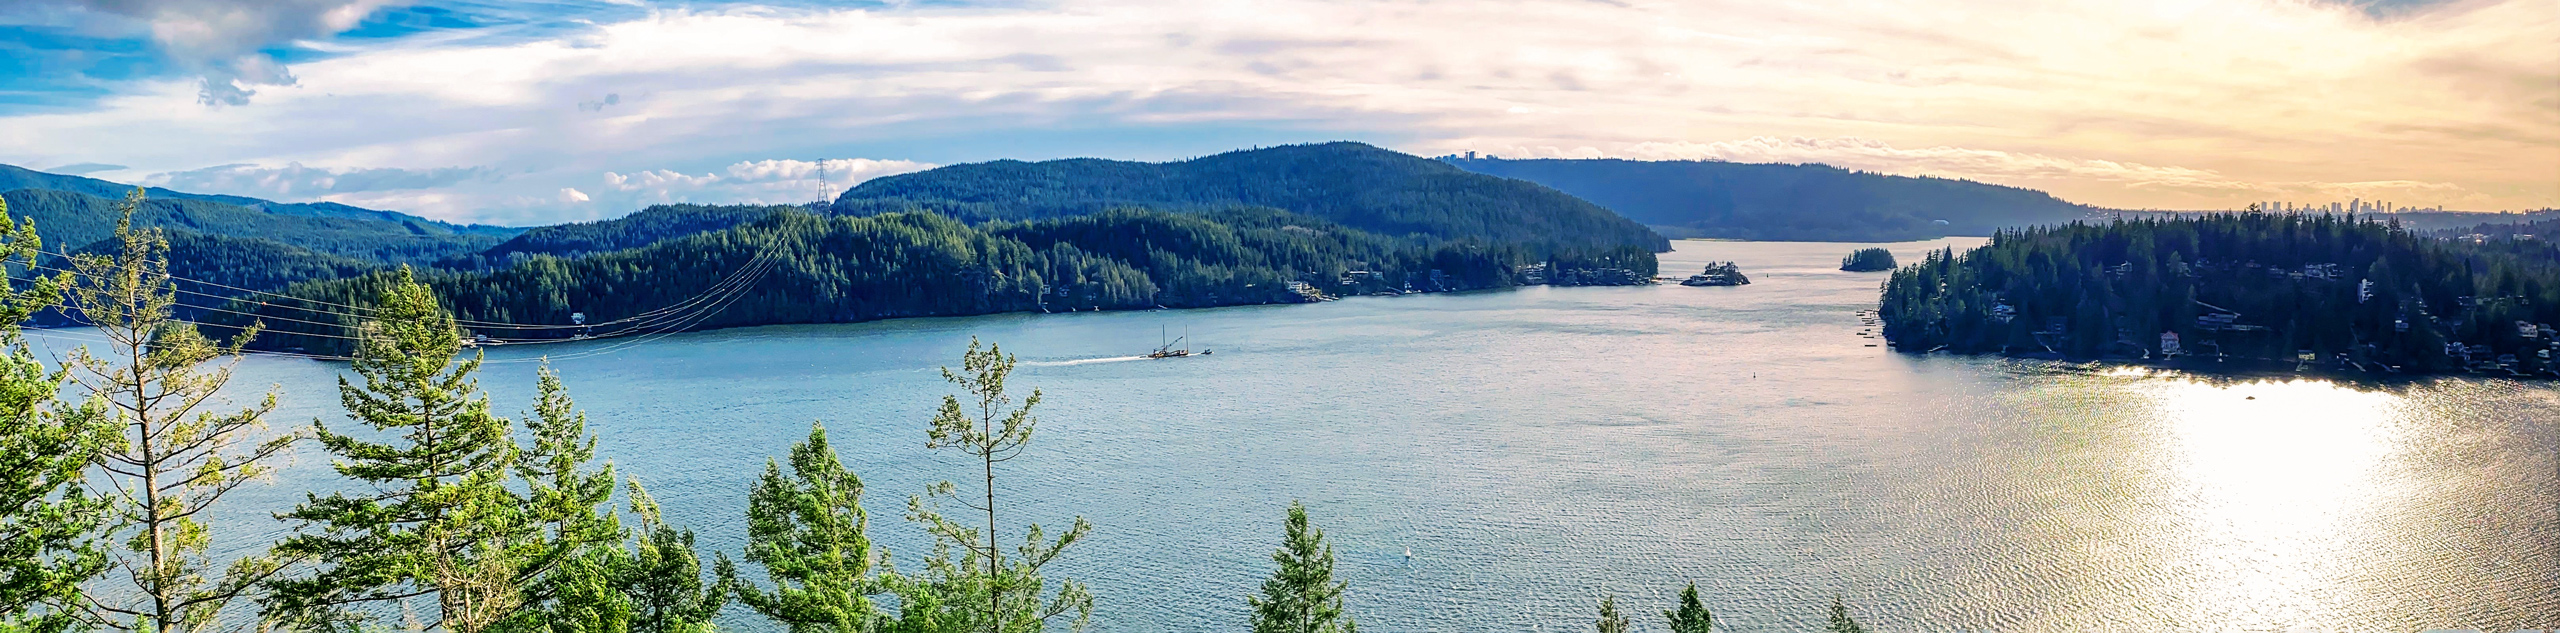 Quarry Rock Hike from Deep Cove